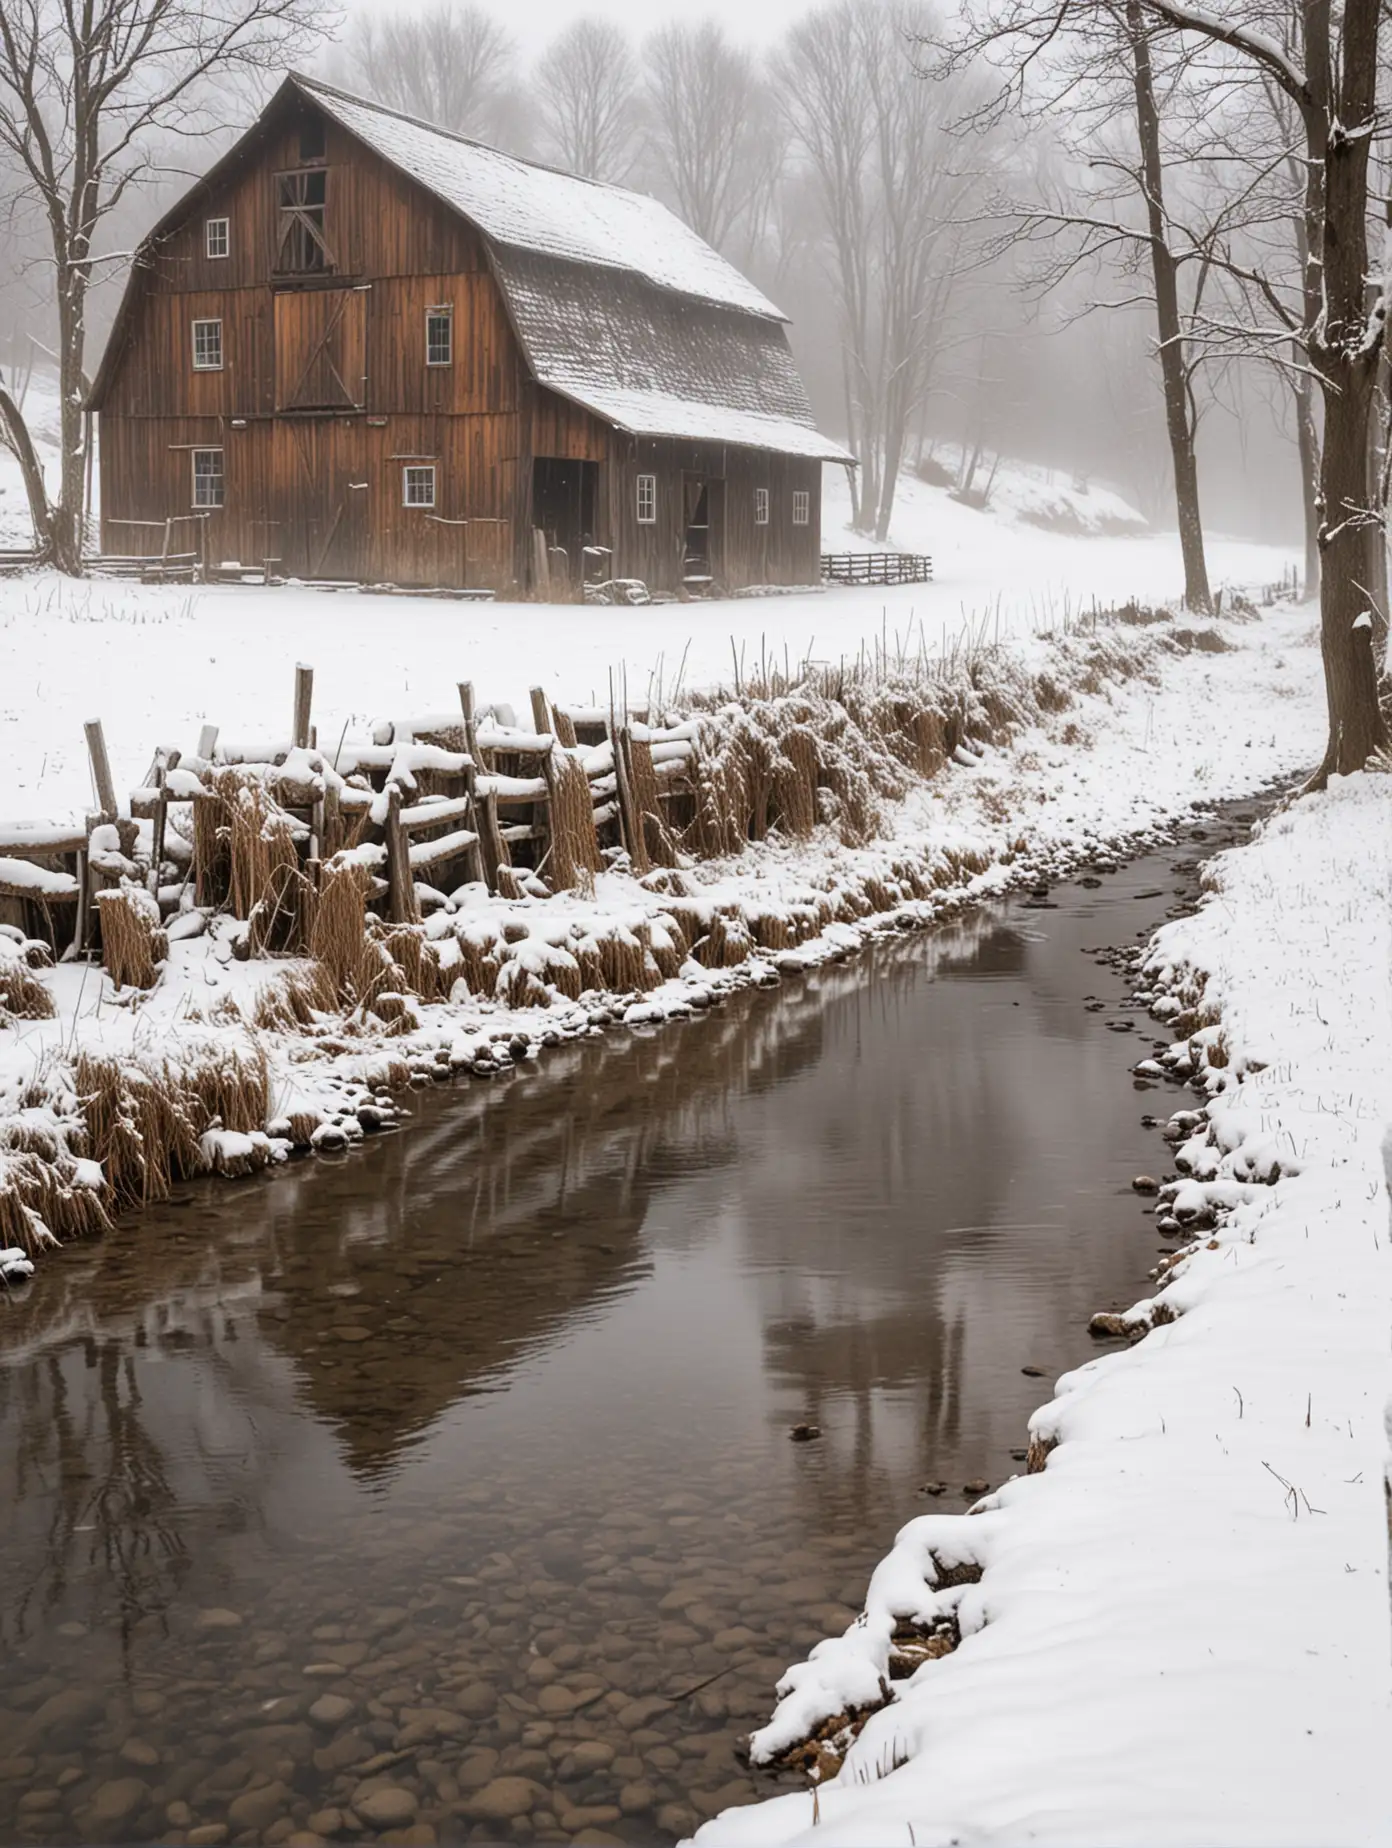 Rustic Wooden Barn by Snowy Stream Tranquil Winter Scene with Deer